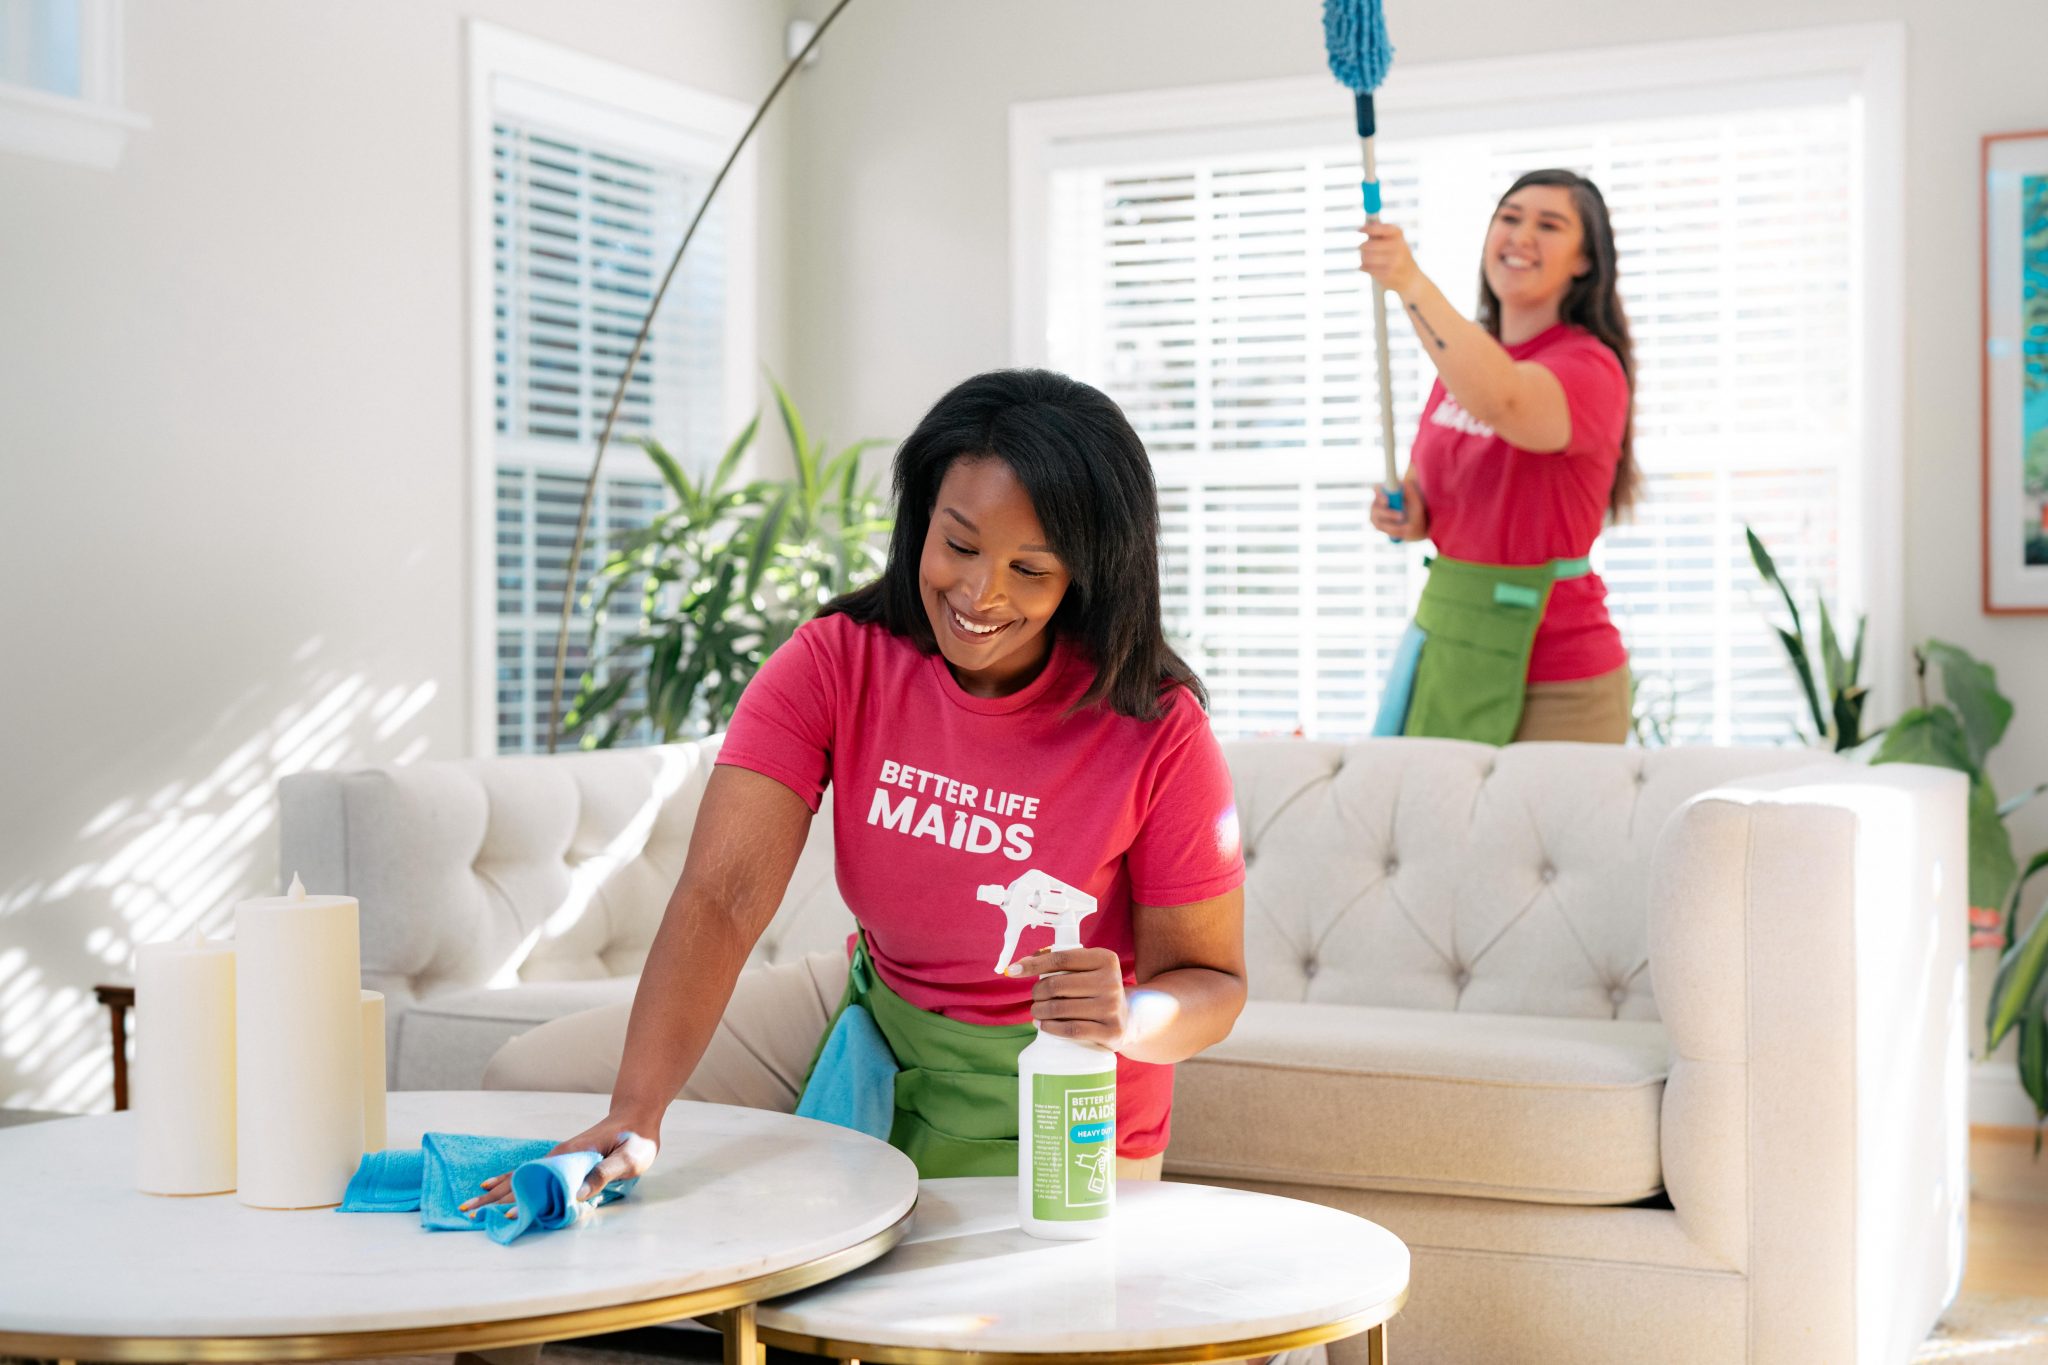 better life maids, house cleaning in clayton, house cleaning near me, house cleaning near clayton, best maids in clayton, best maid service near me, top quality maids, residential cleaner, move out maids clayton